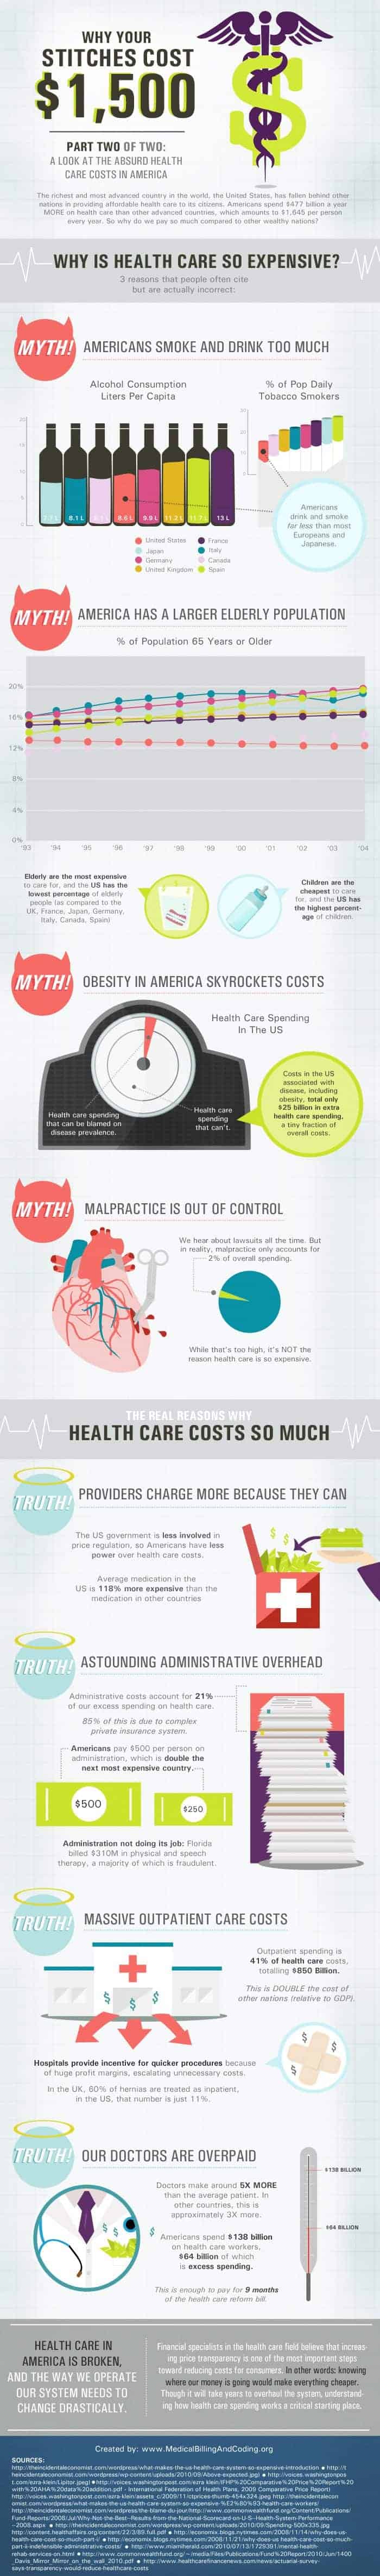 Healthcare Costs in America